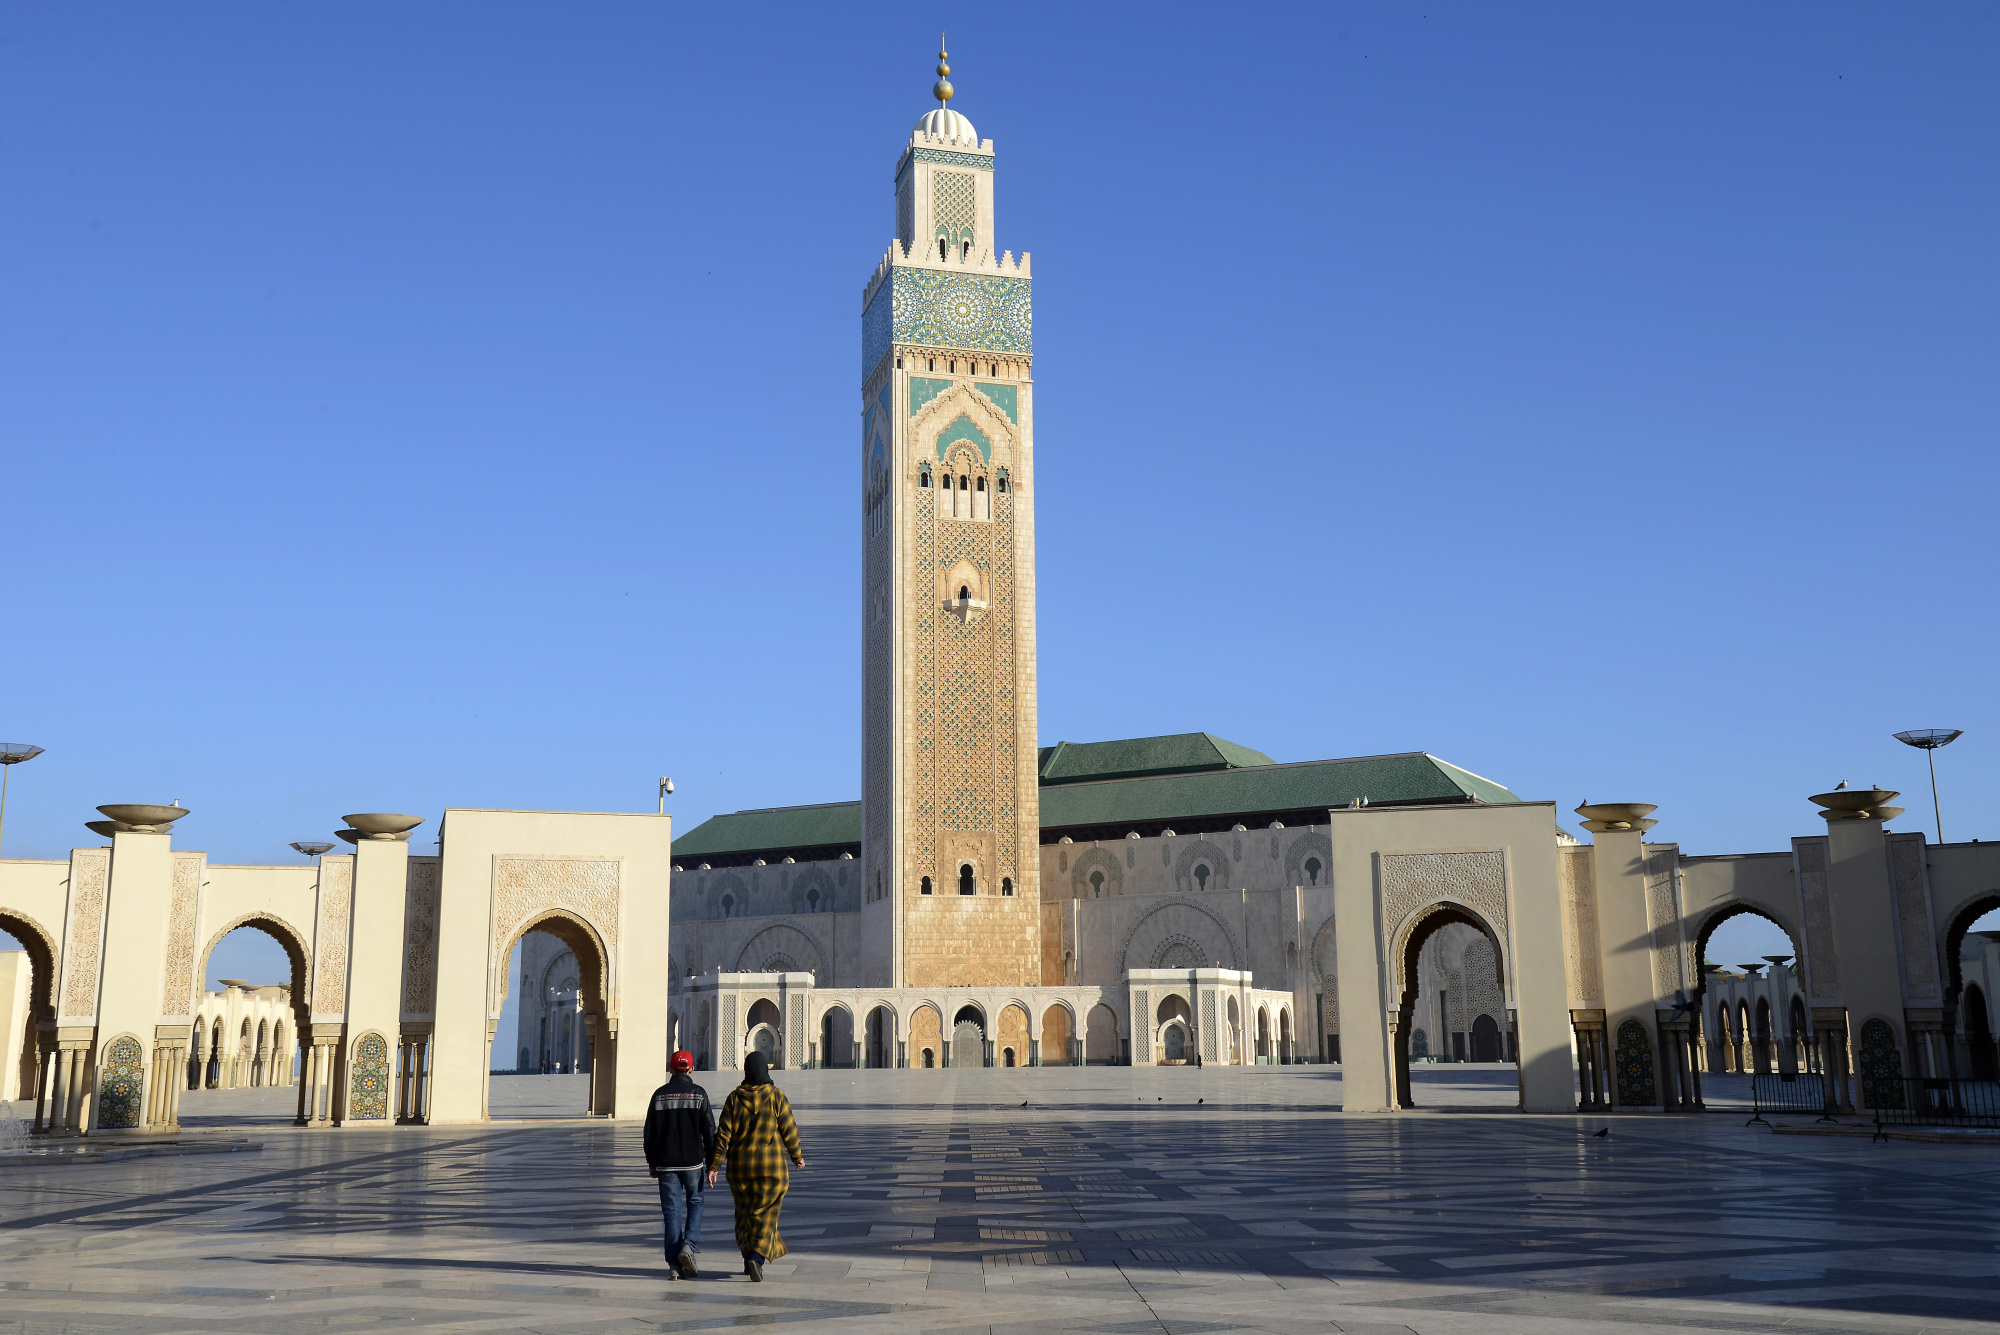 Hassan Ii Mosque (1) | Casablanca | Pictures | Geography tout Mosquée Hassan 2 Dessin